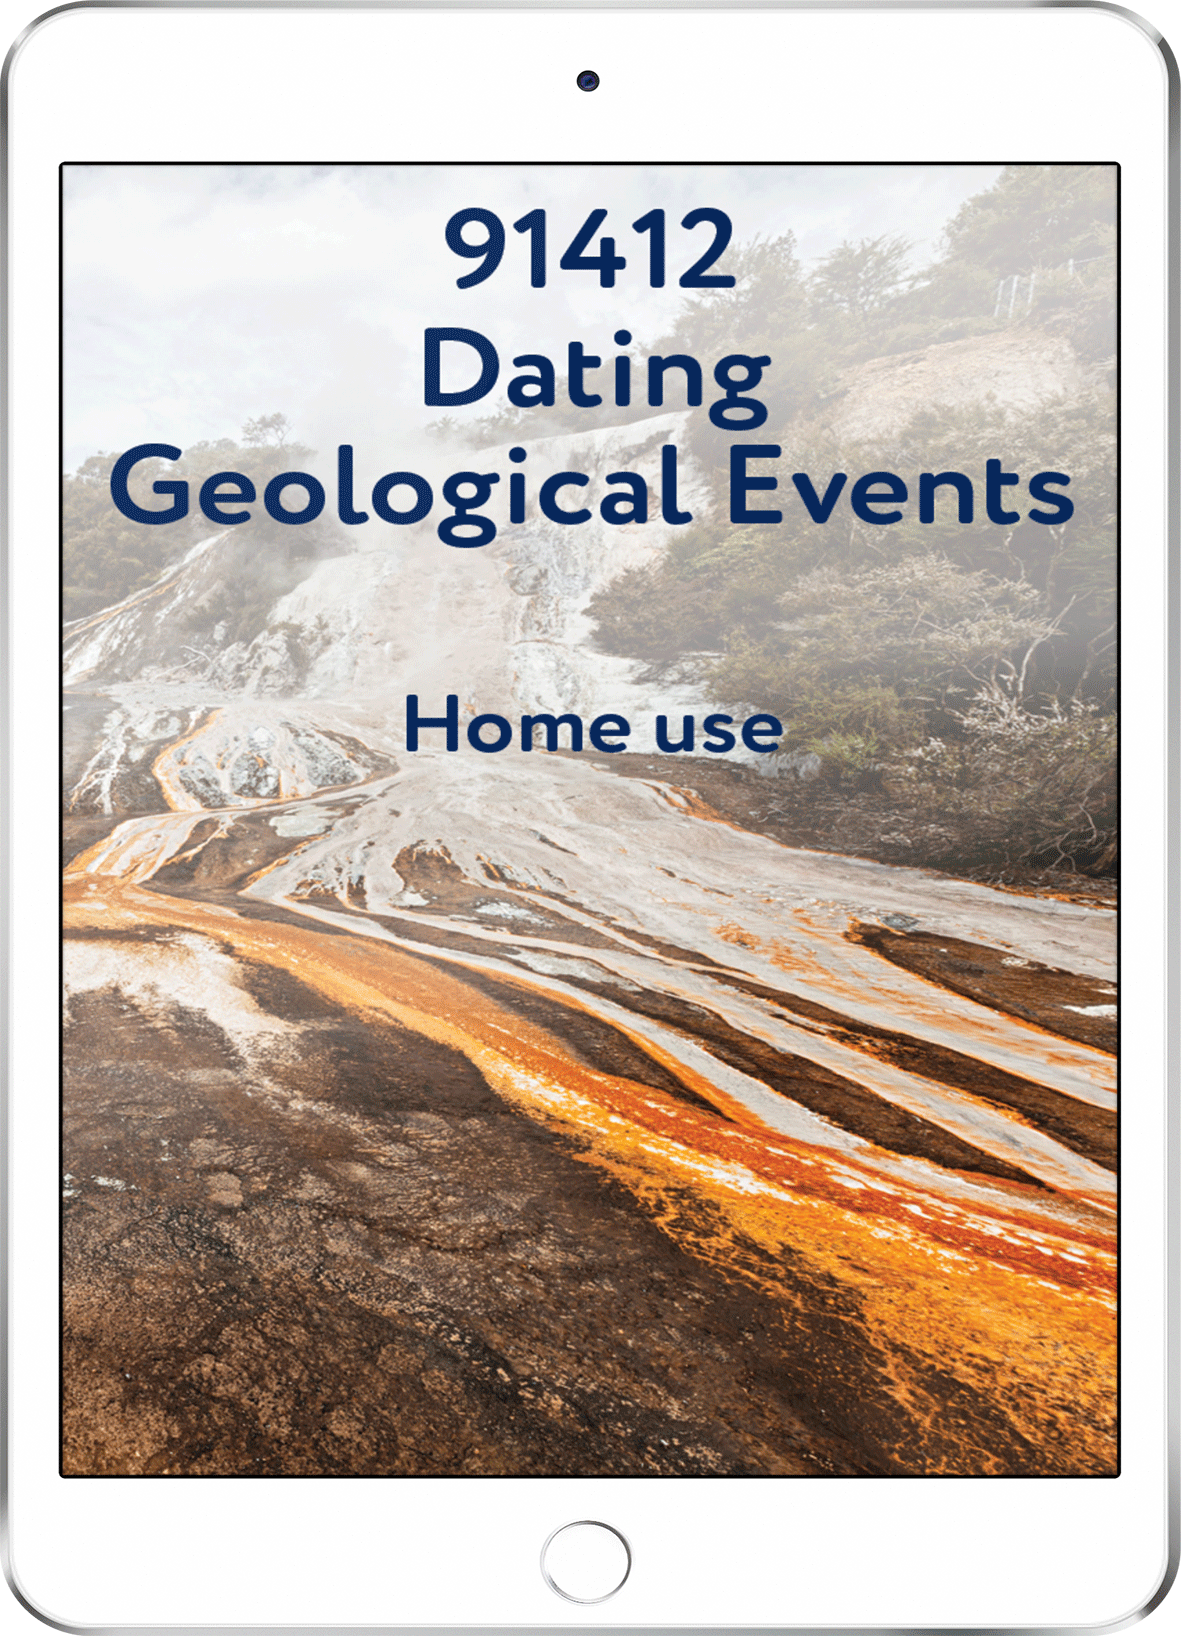 91412 Dating Geological Events - Home Use